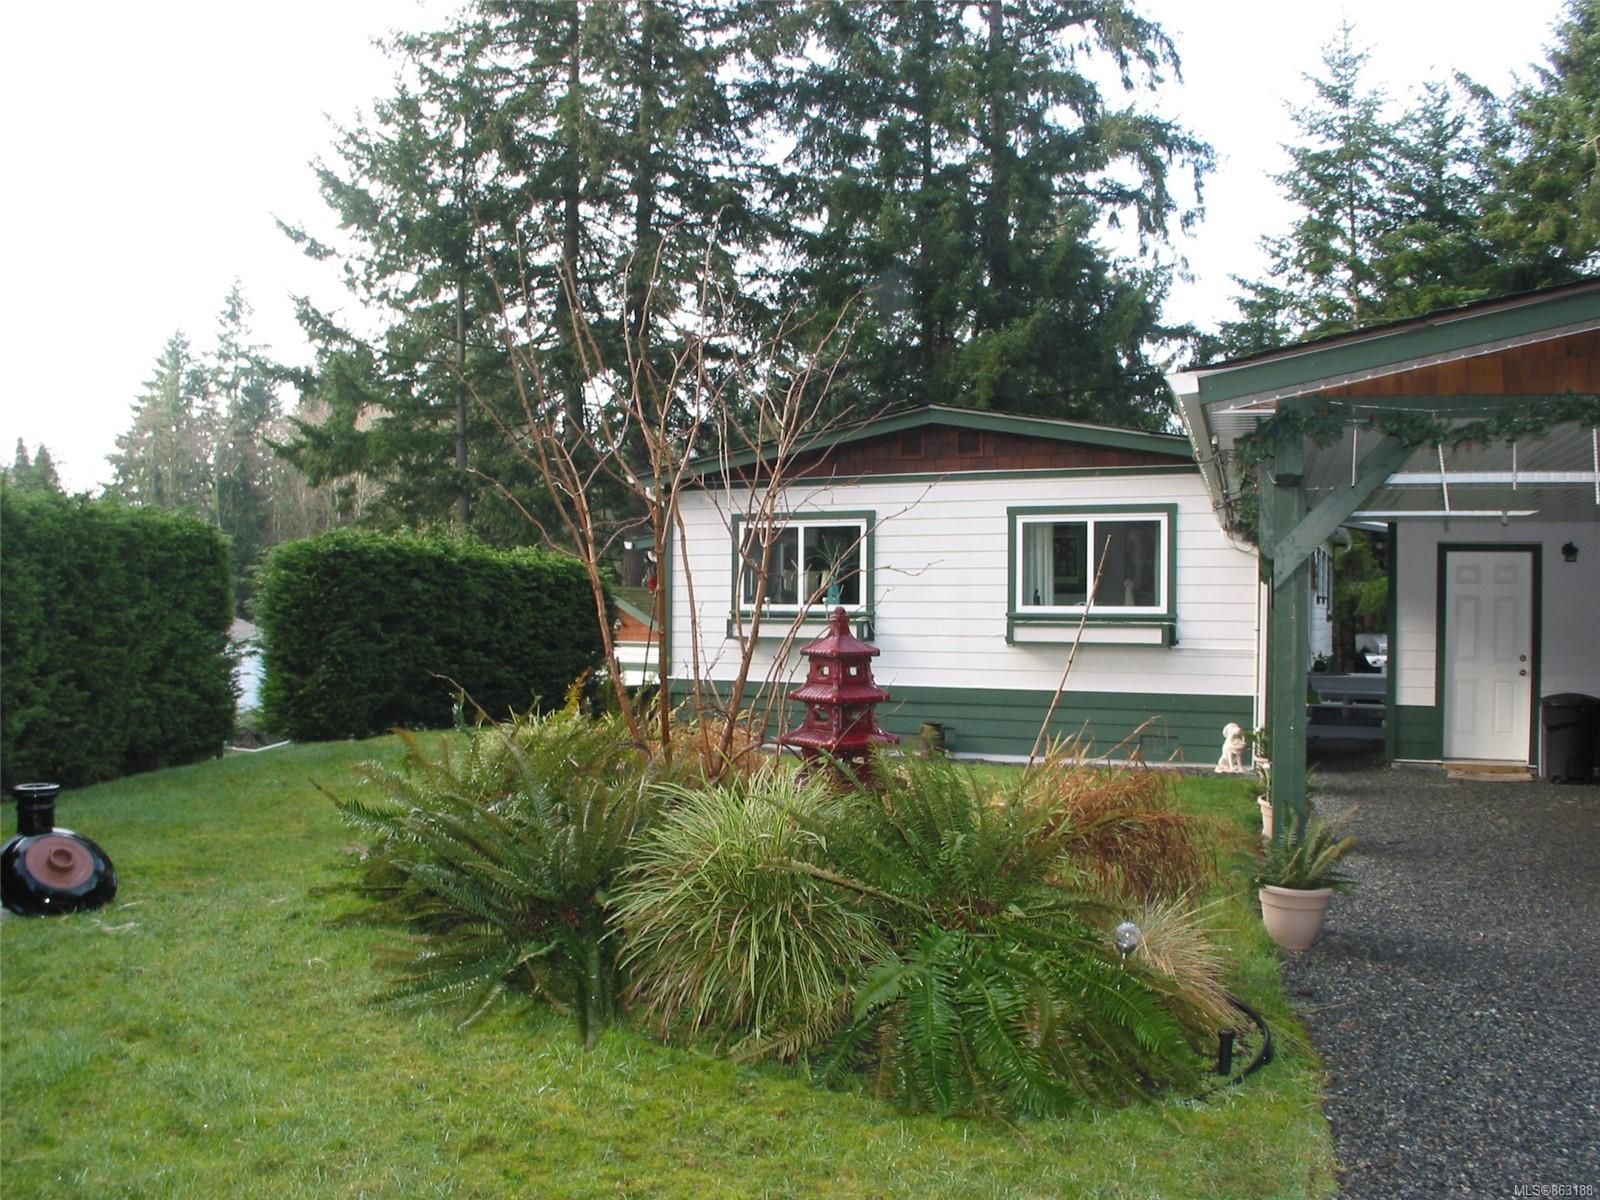 I have sold a property at 45 2785 Wallbank Rd in Shawnigan Lake
